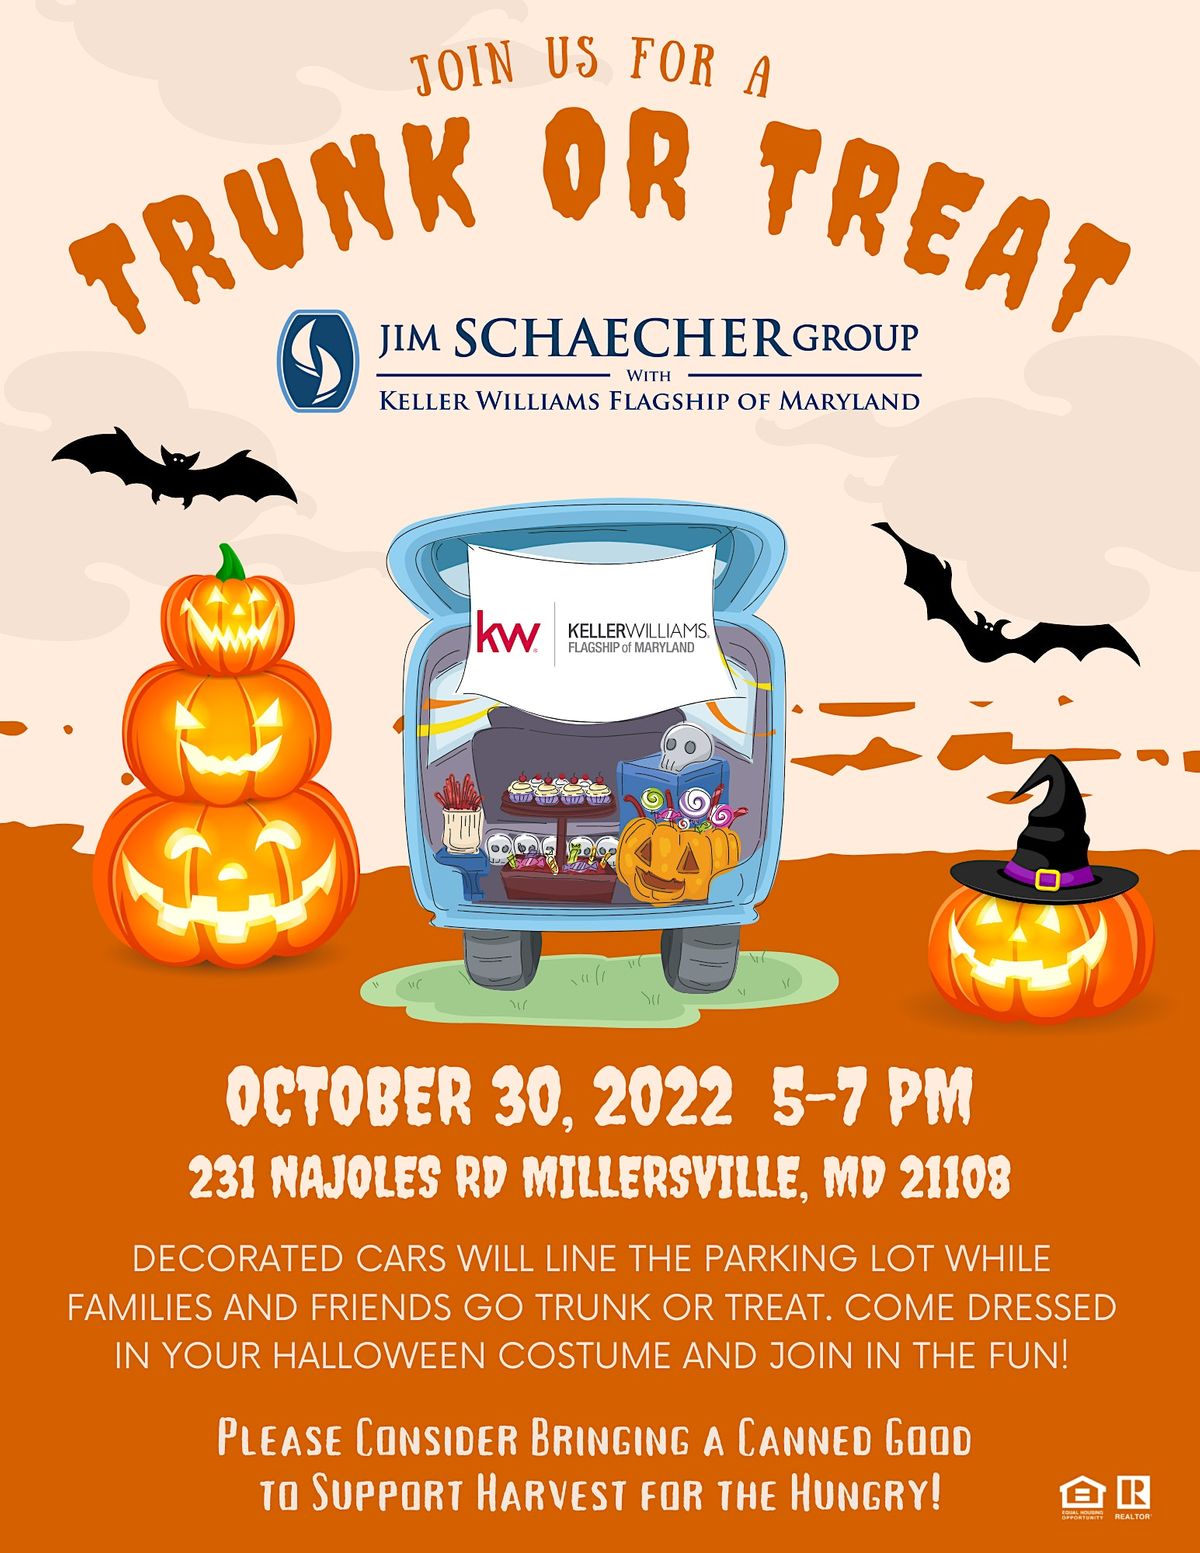 Trunk or Treat with the Jim Schaecher Group Keller Williams Flagship